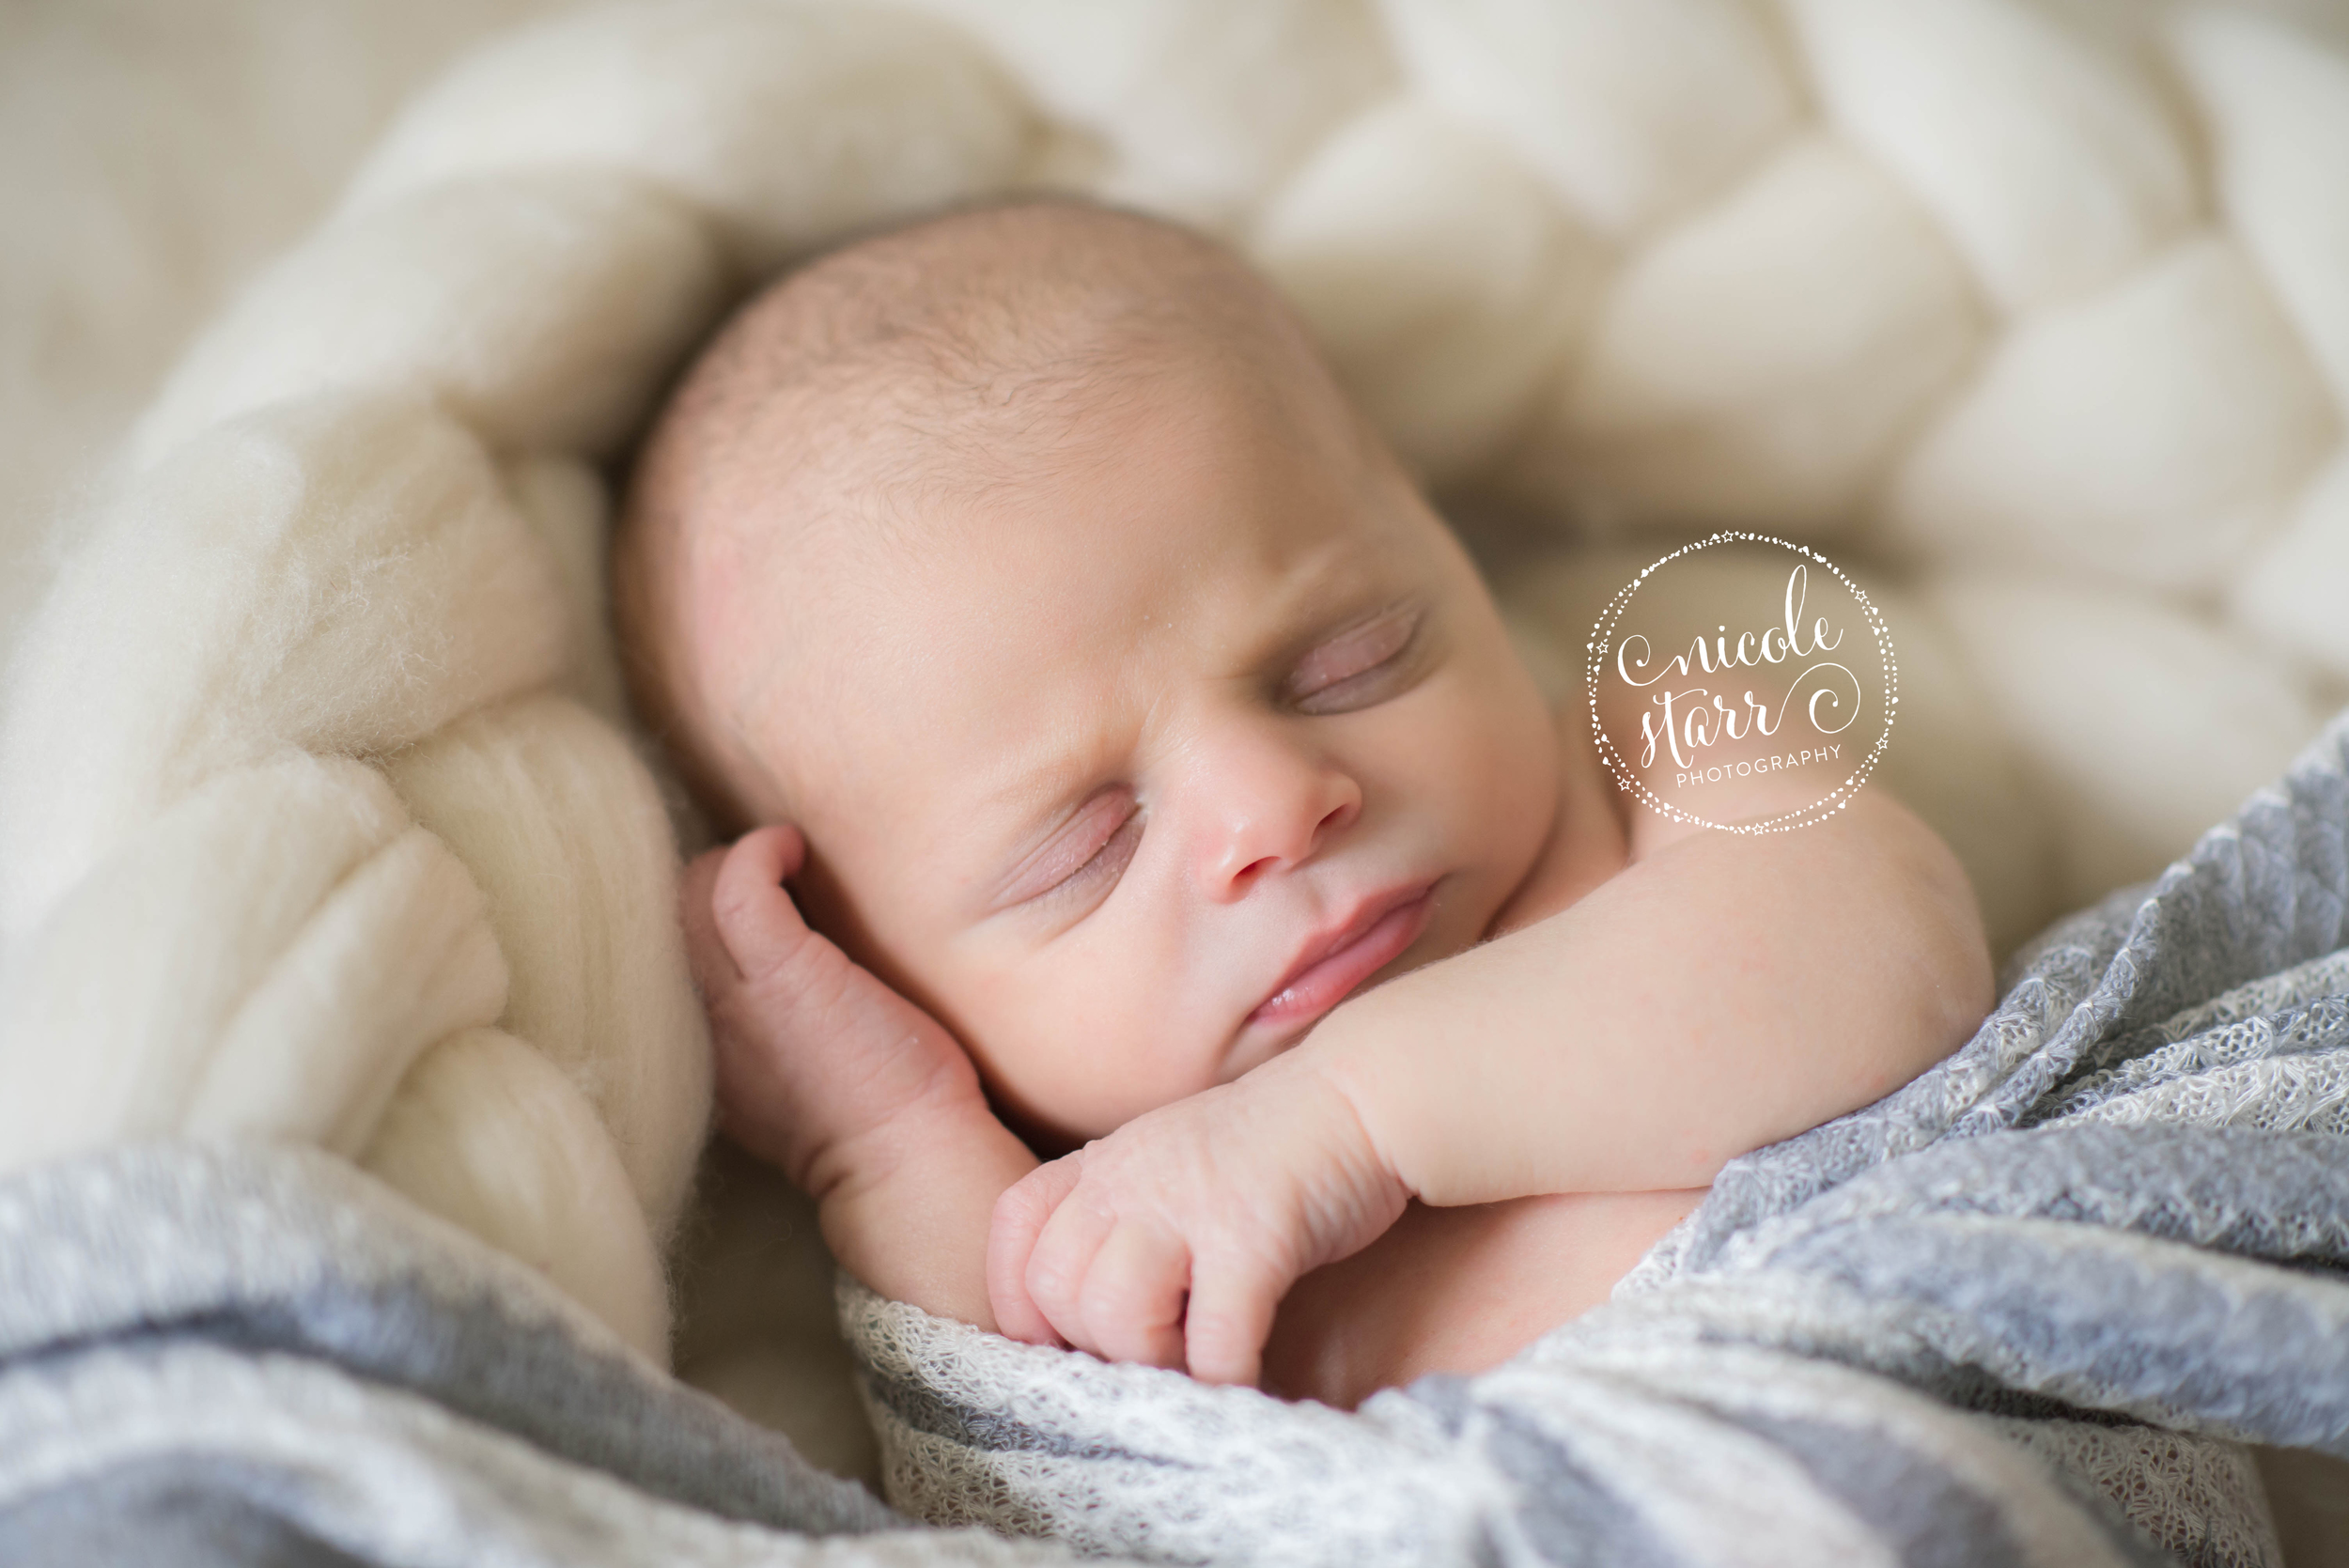 asleep newborn photo with soft color palette